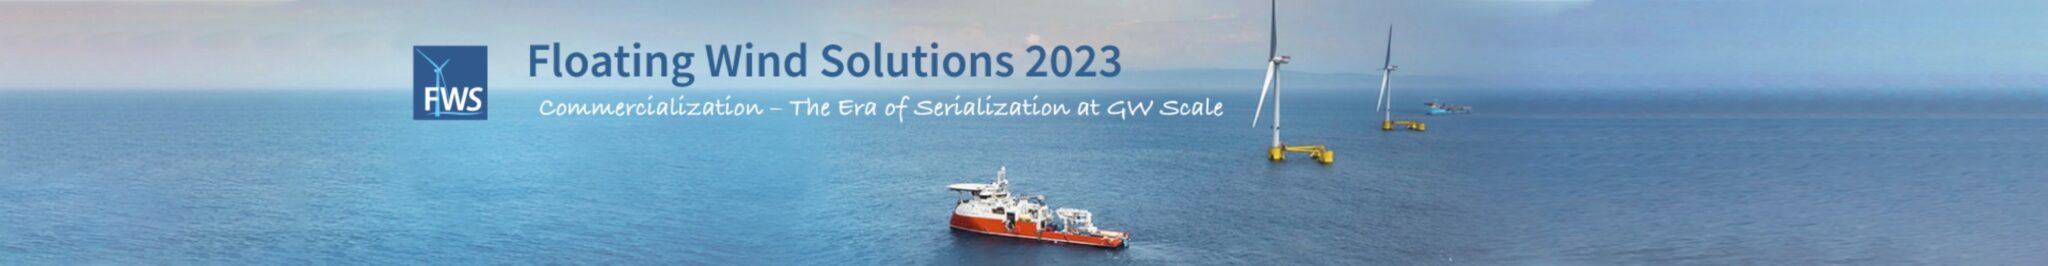 Floating Wind Solutions 2023 Banner 2048x266 